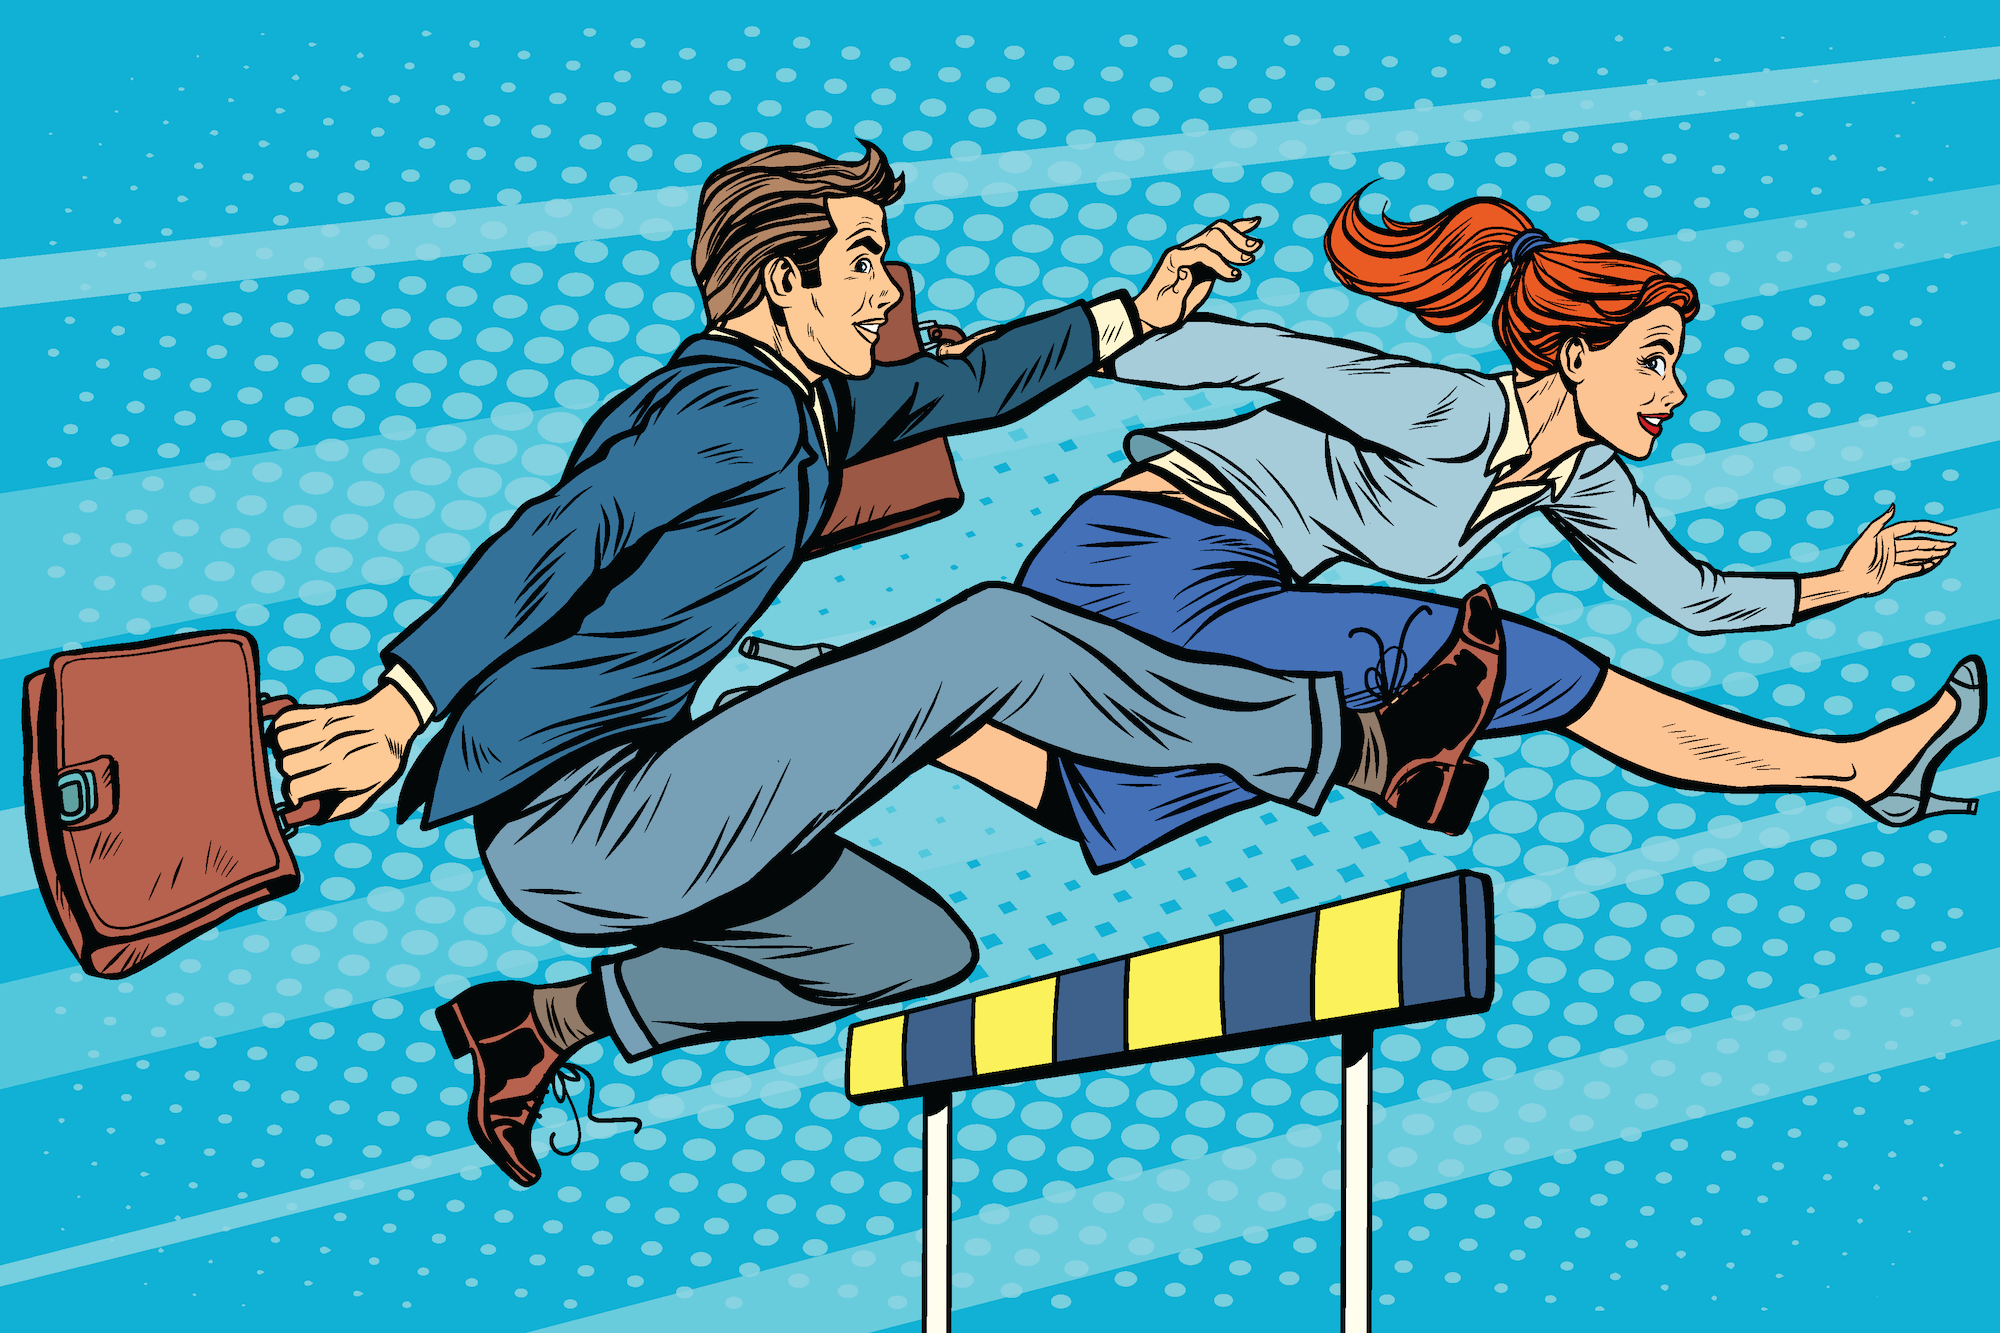 Pop art man and woman with briefcase jumping over a hurdle